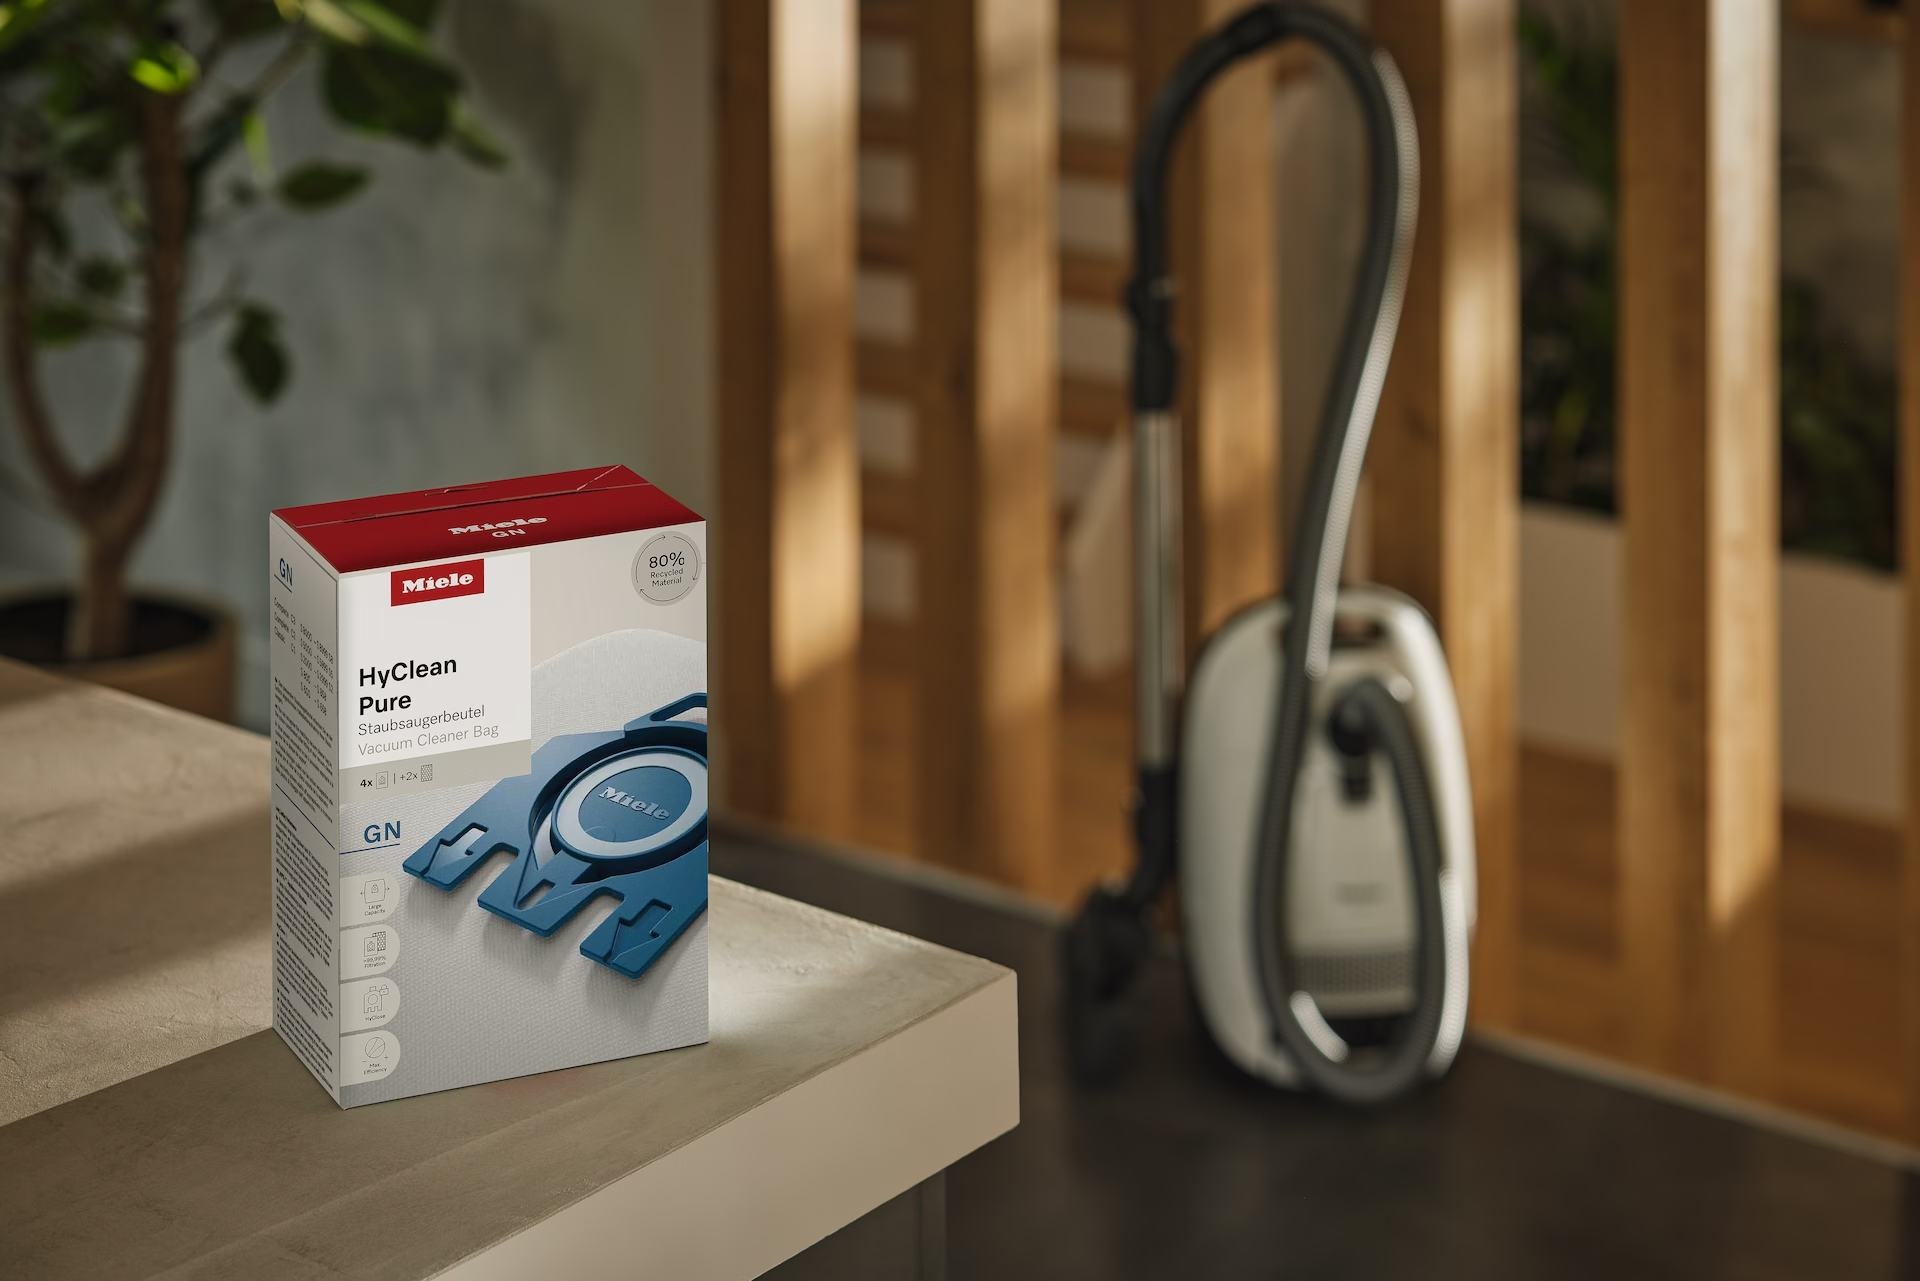 Miele Staubsaugerbeutel »HyClean Pure GN«